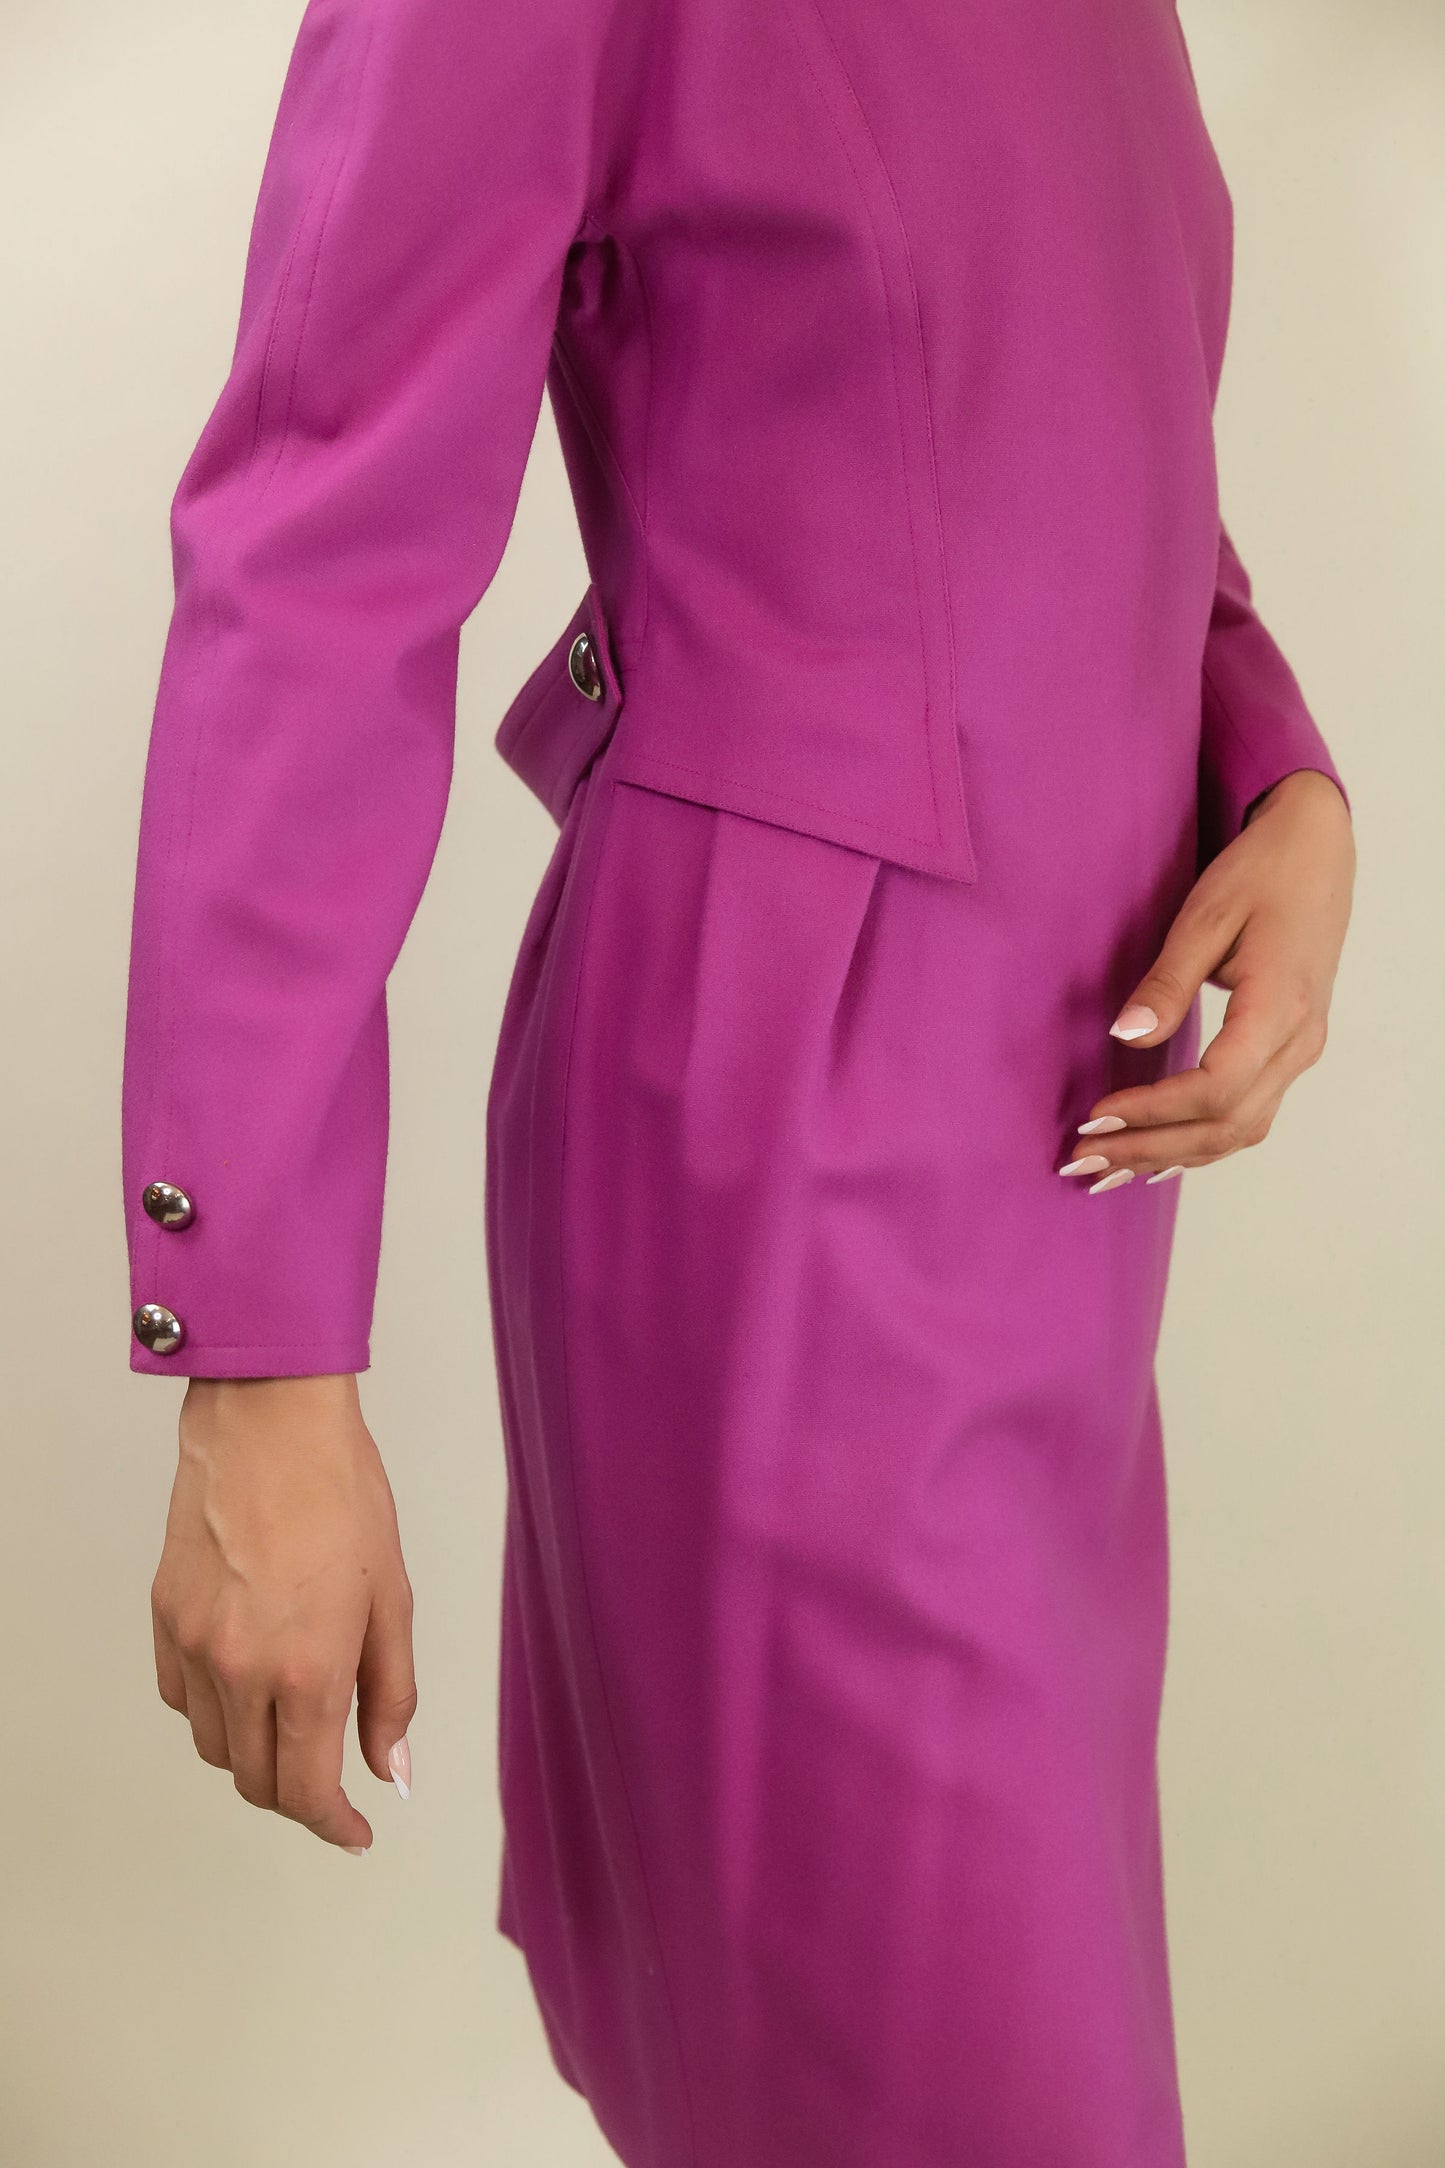 Courreges c. 1980's Pink Wool Dress with Silver Buttons